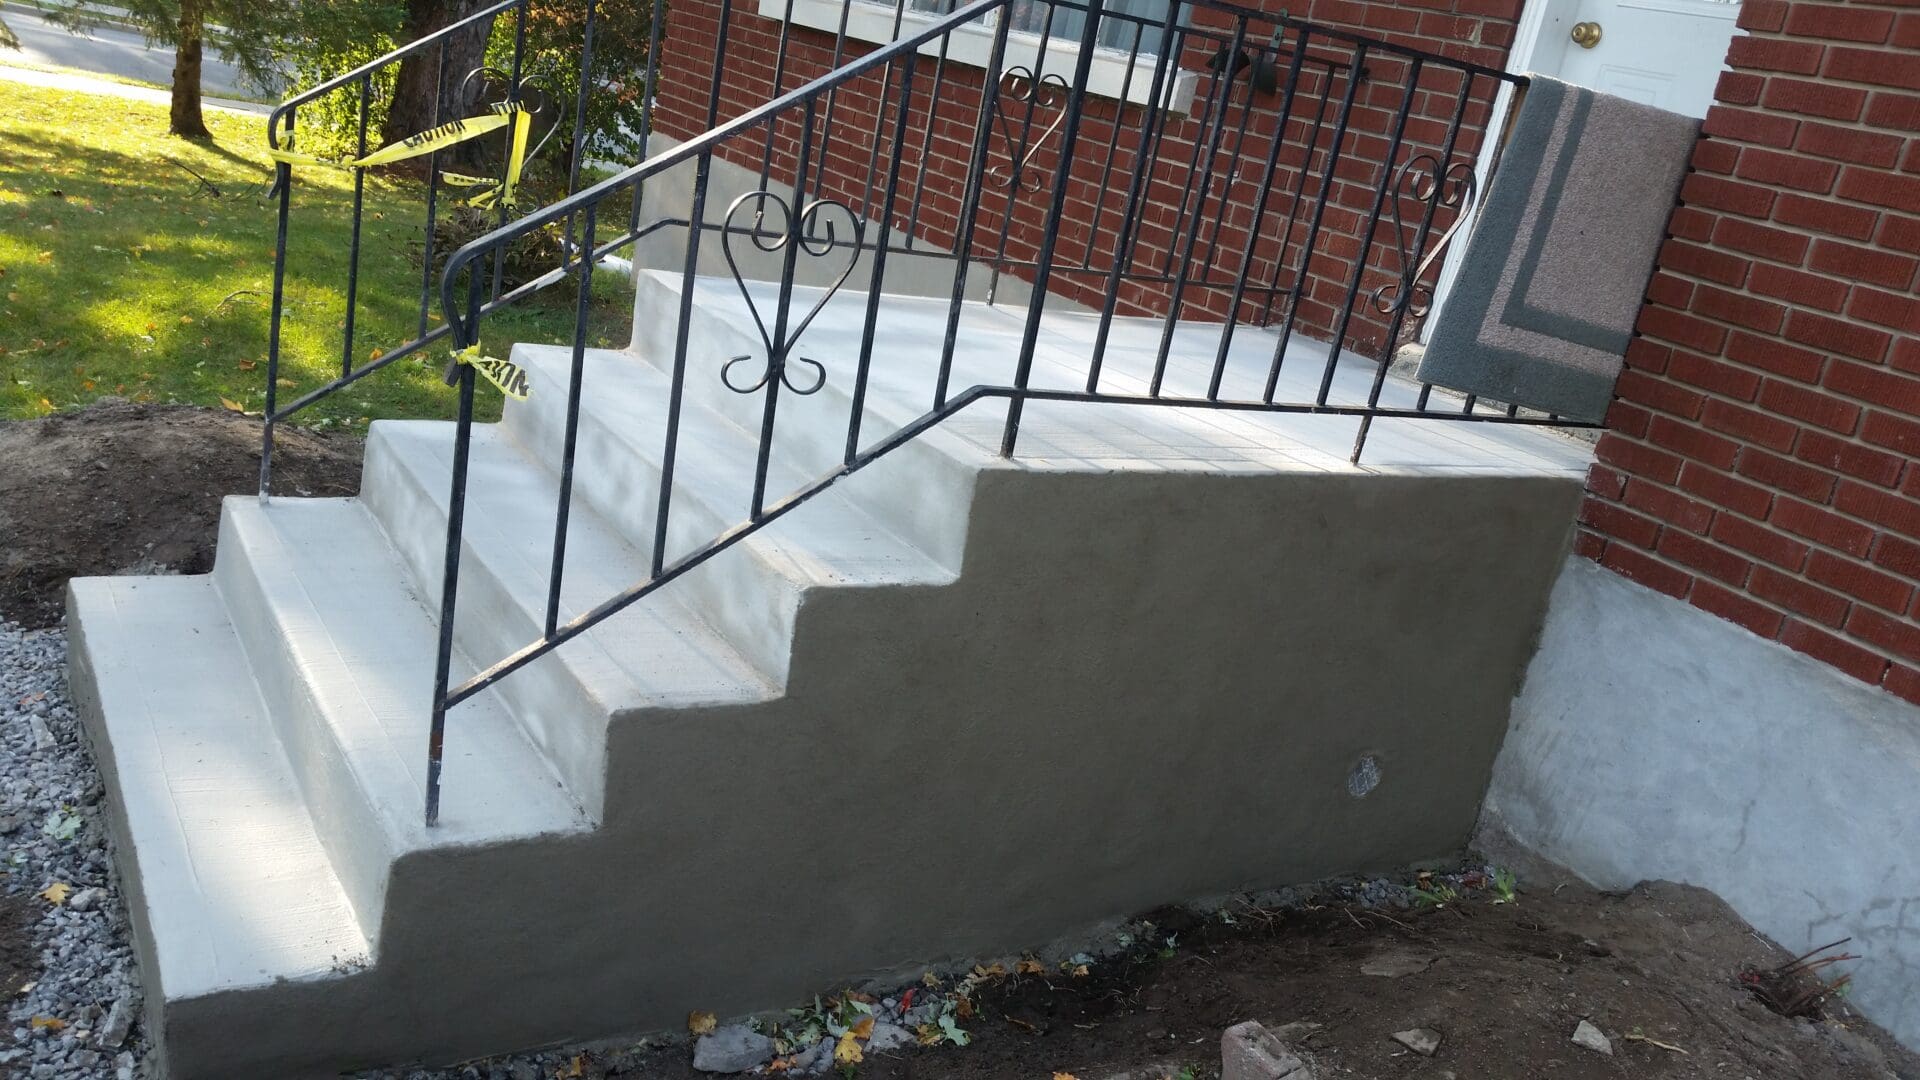 Parging the concrete stairs with black railings leading to a front door